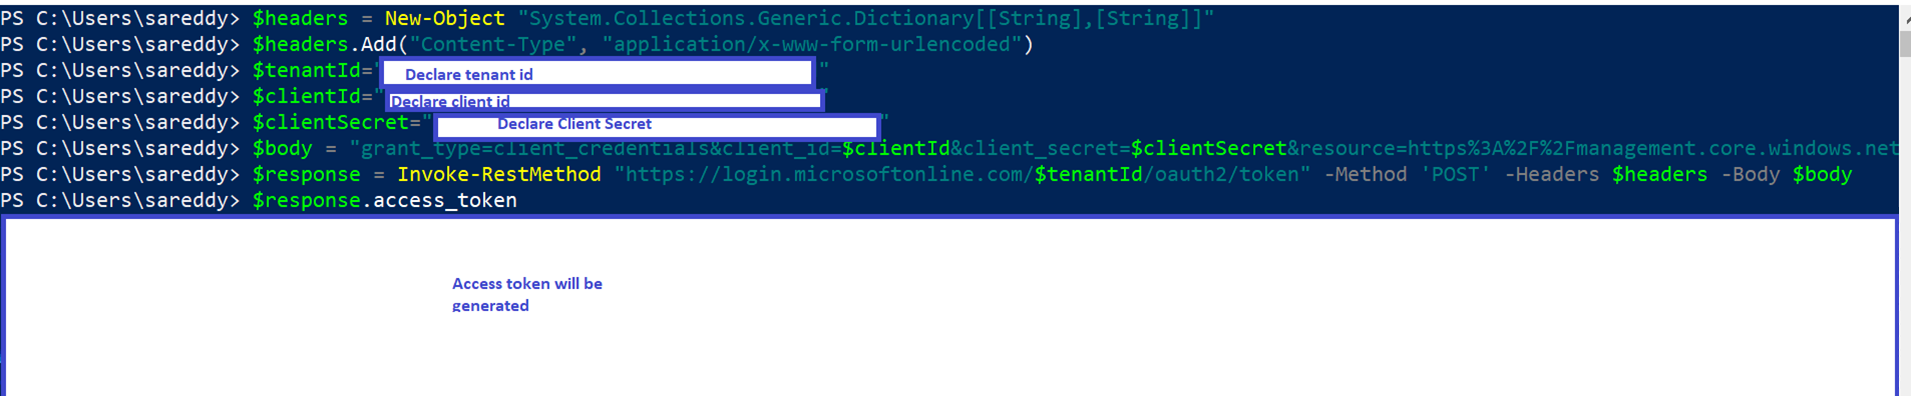 Shows a screen example for generating an access token in PowerShell.